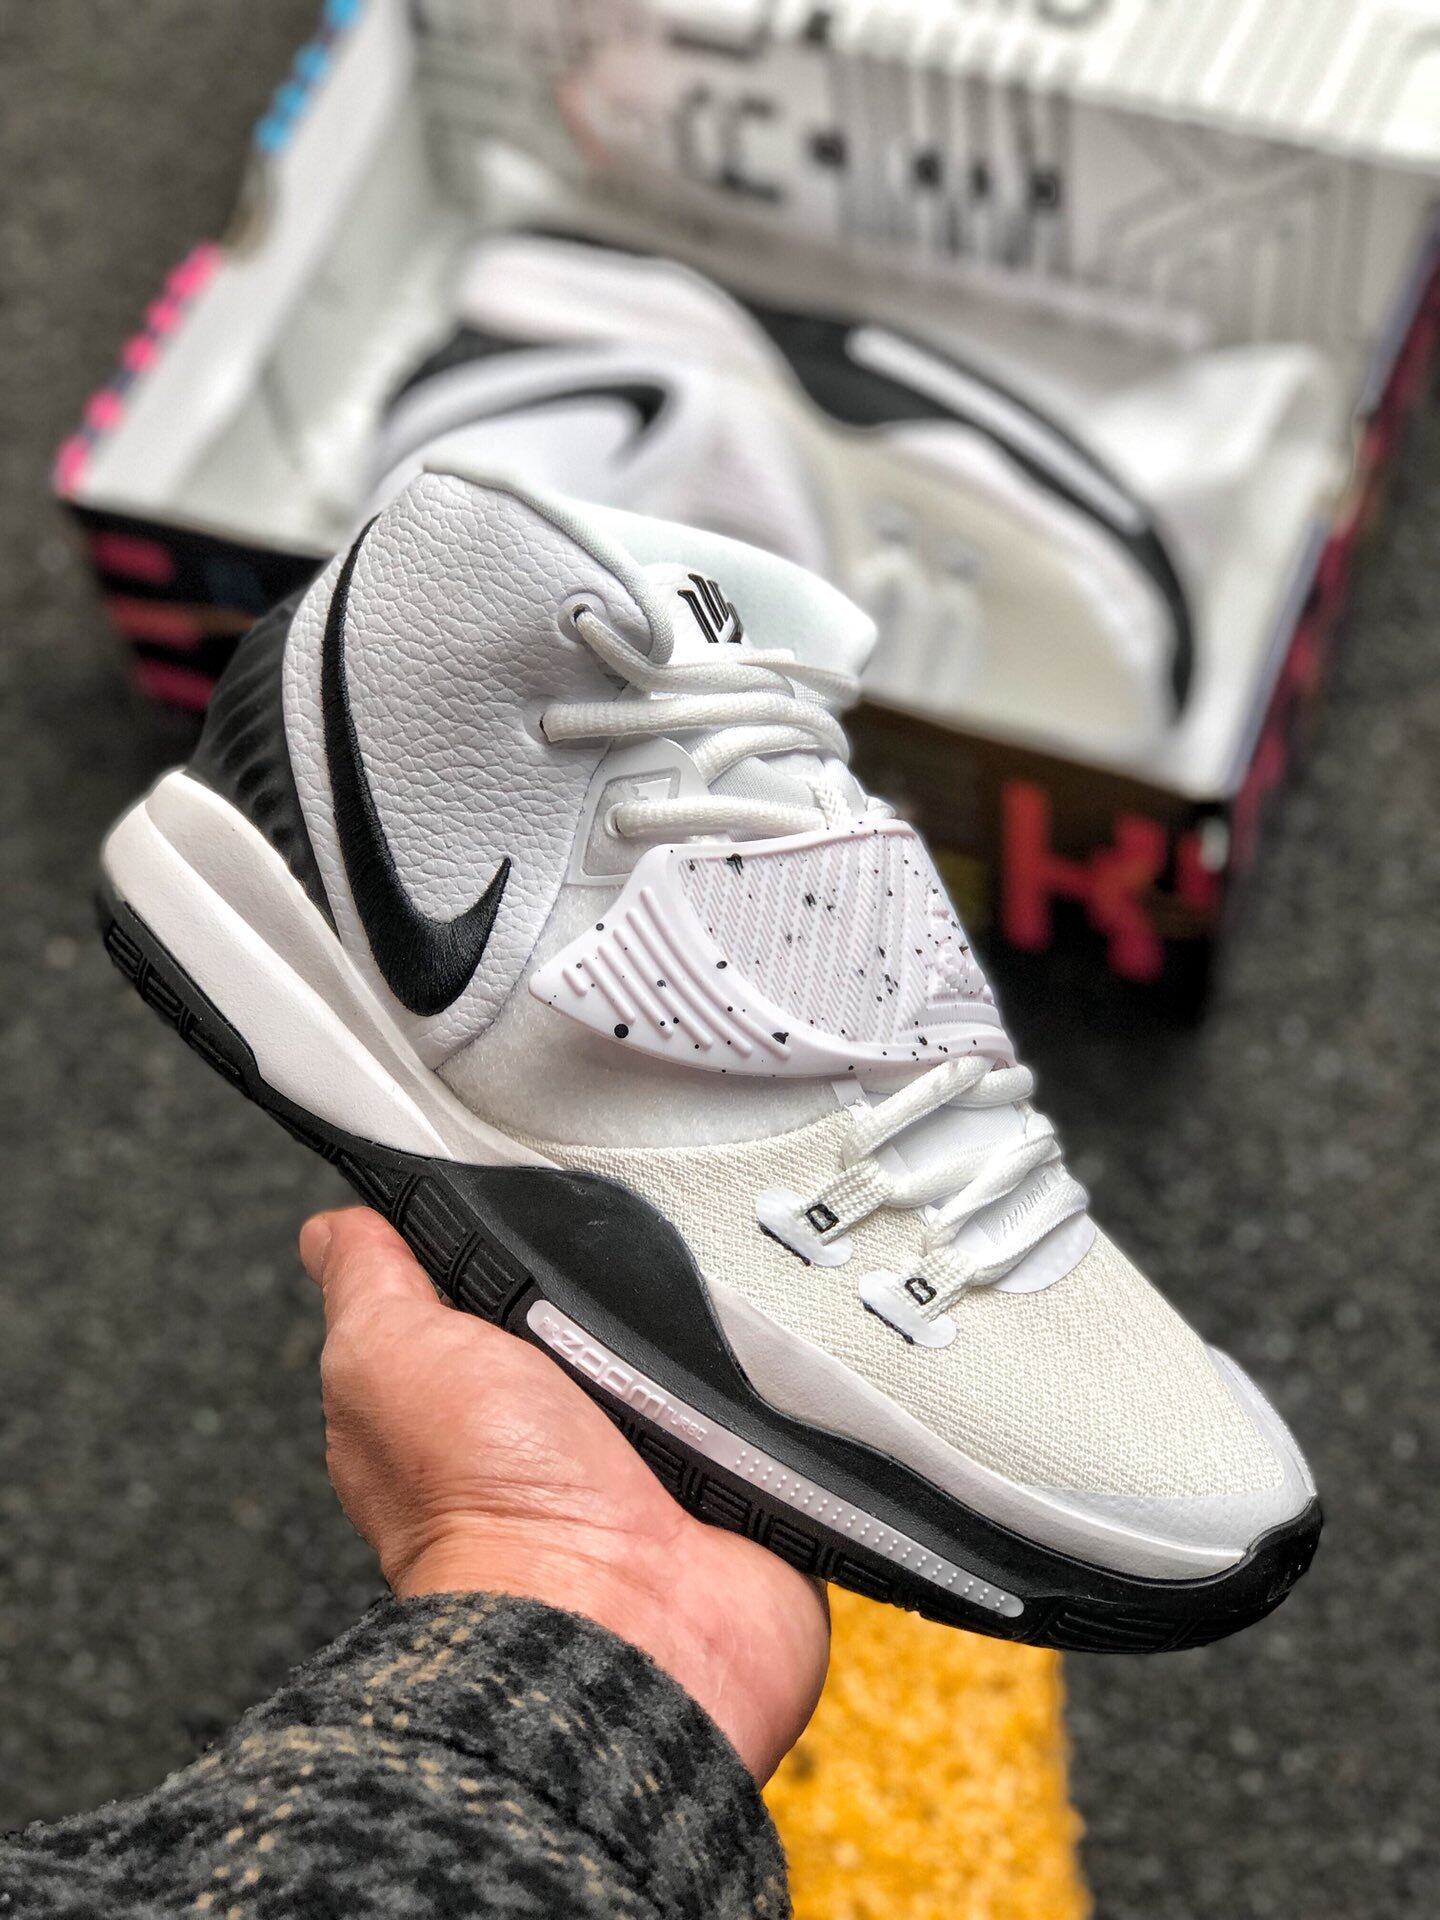 kyrie 6 white and black